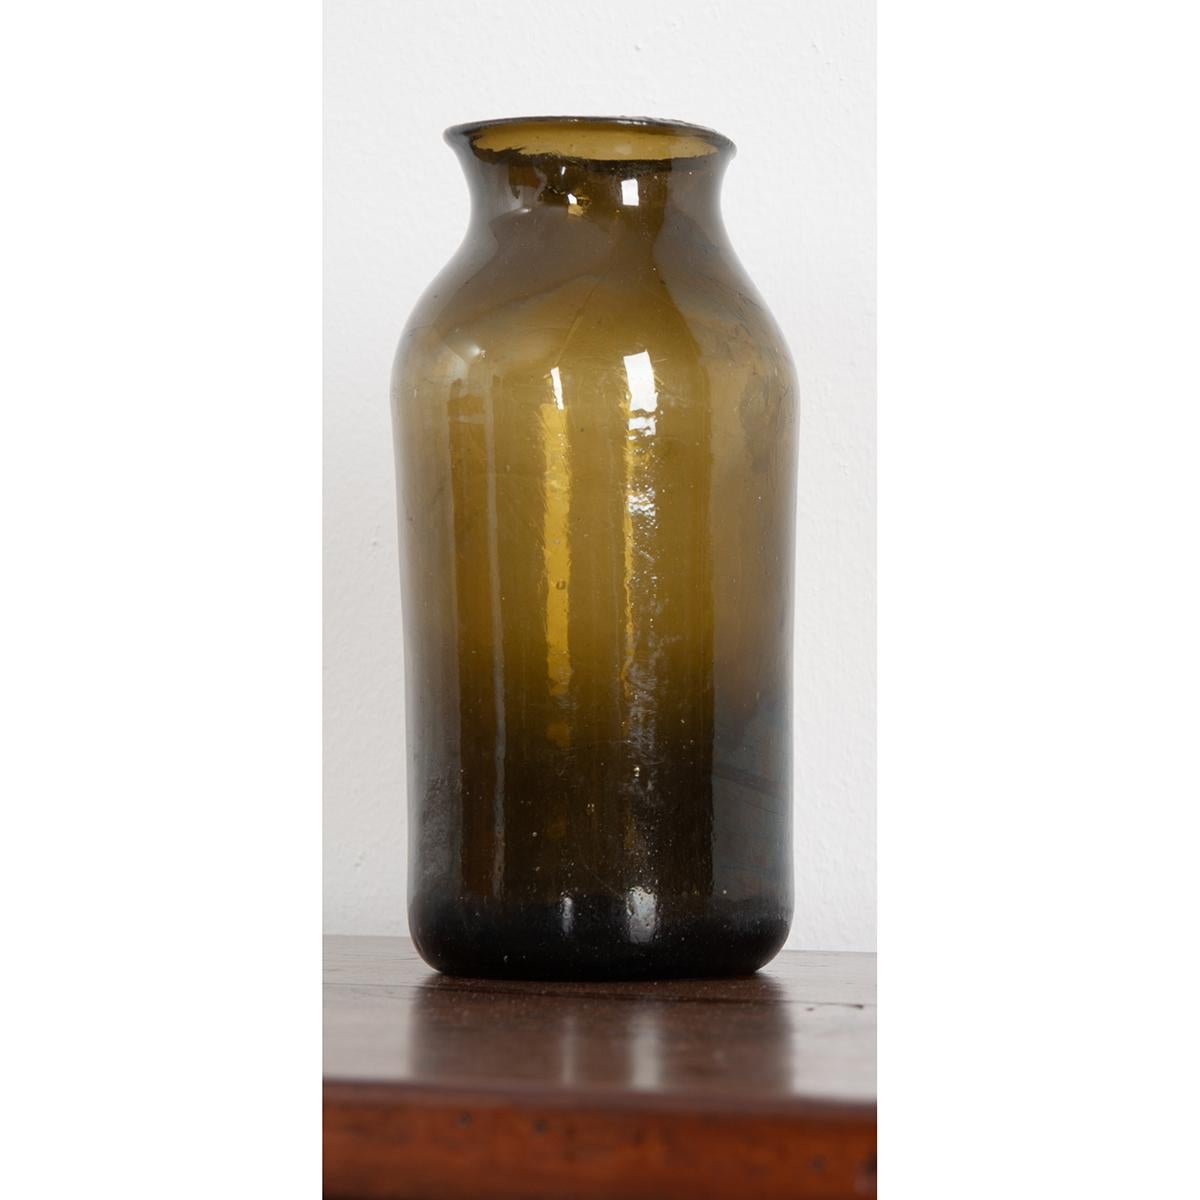 This hand blown jar, circa 1790, has unique coloration due to their one of a kind nature. Rare and highly sought-after, what may be mistaken as imperfections, tilted mouths, bubbles and ripples in glass, are actually the very attributes that make